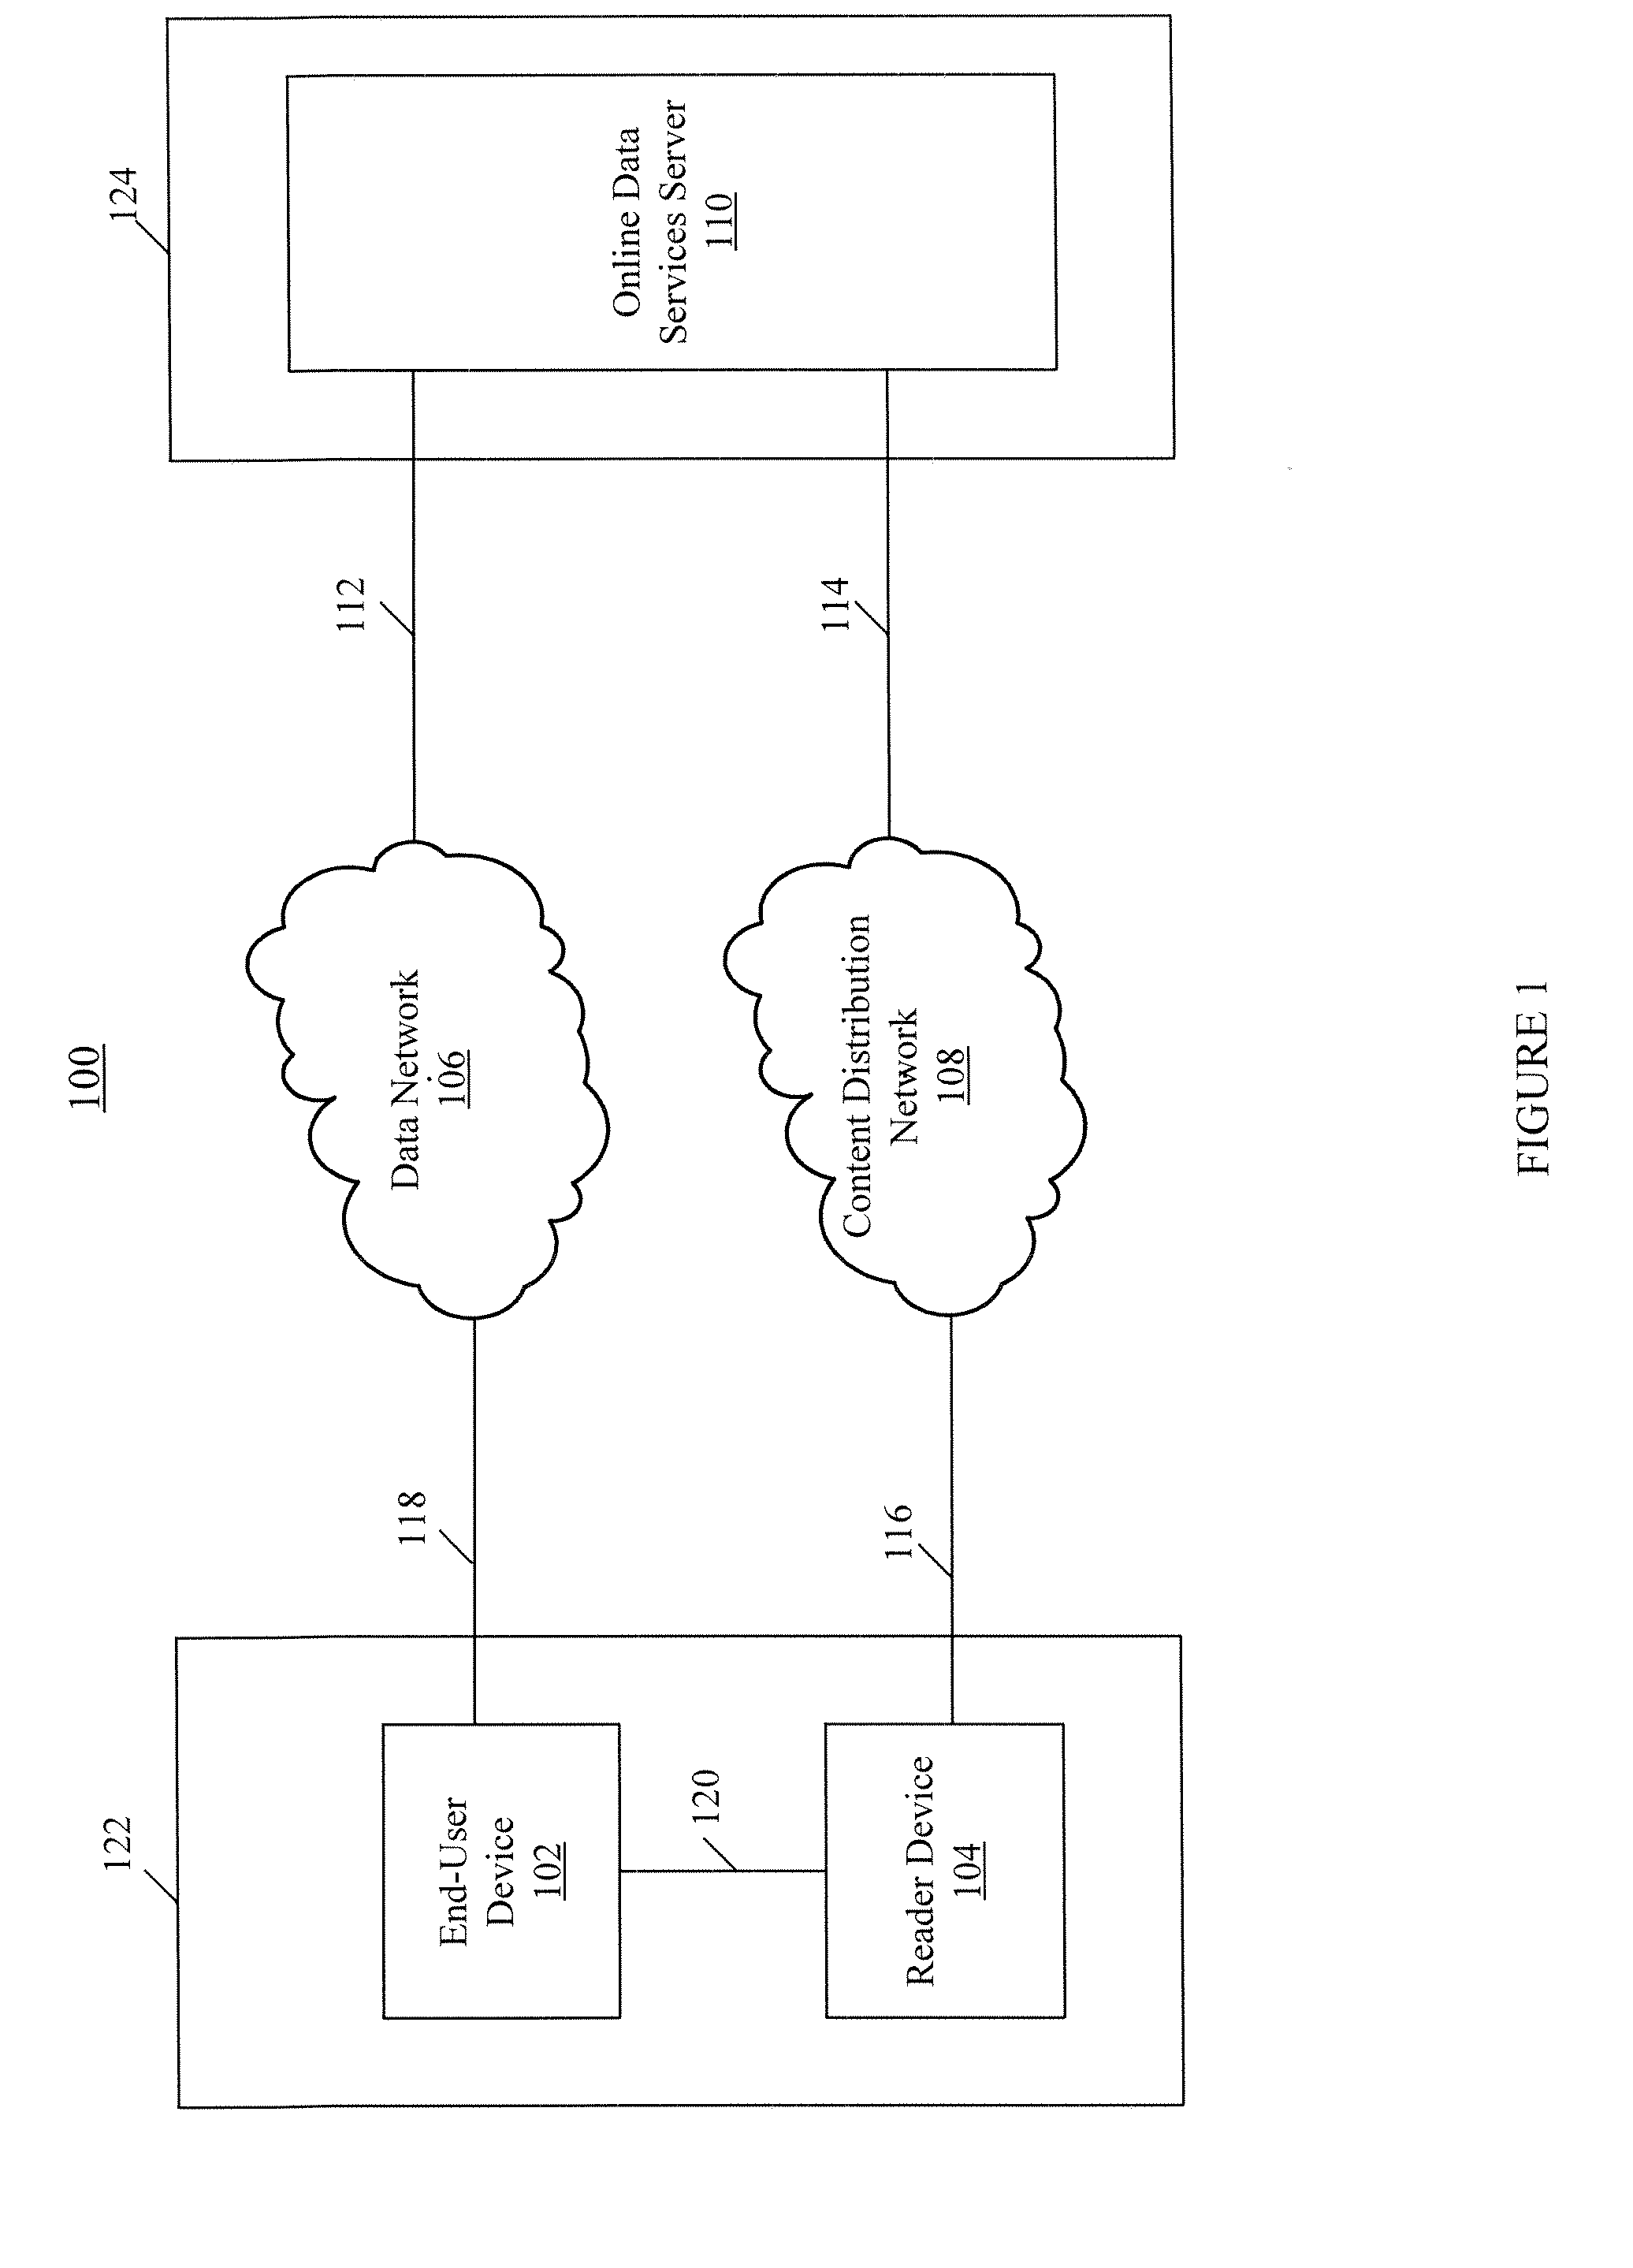 Methods, Apparatus, and Systems for Providing Local and Online Data Services